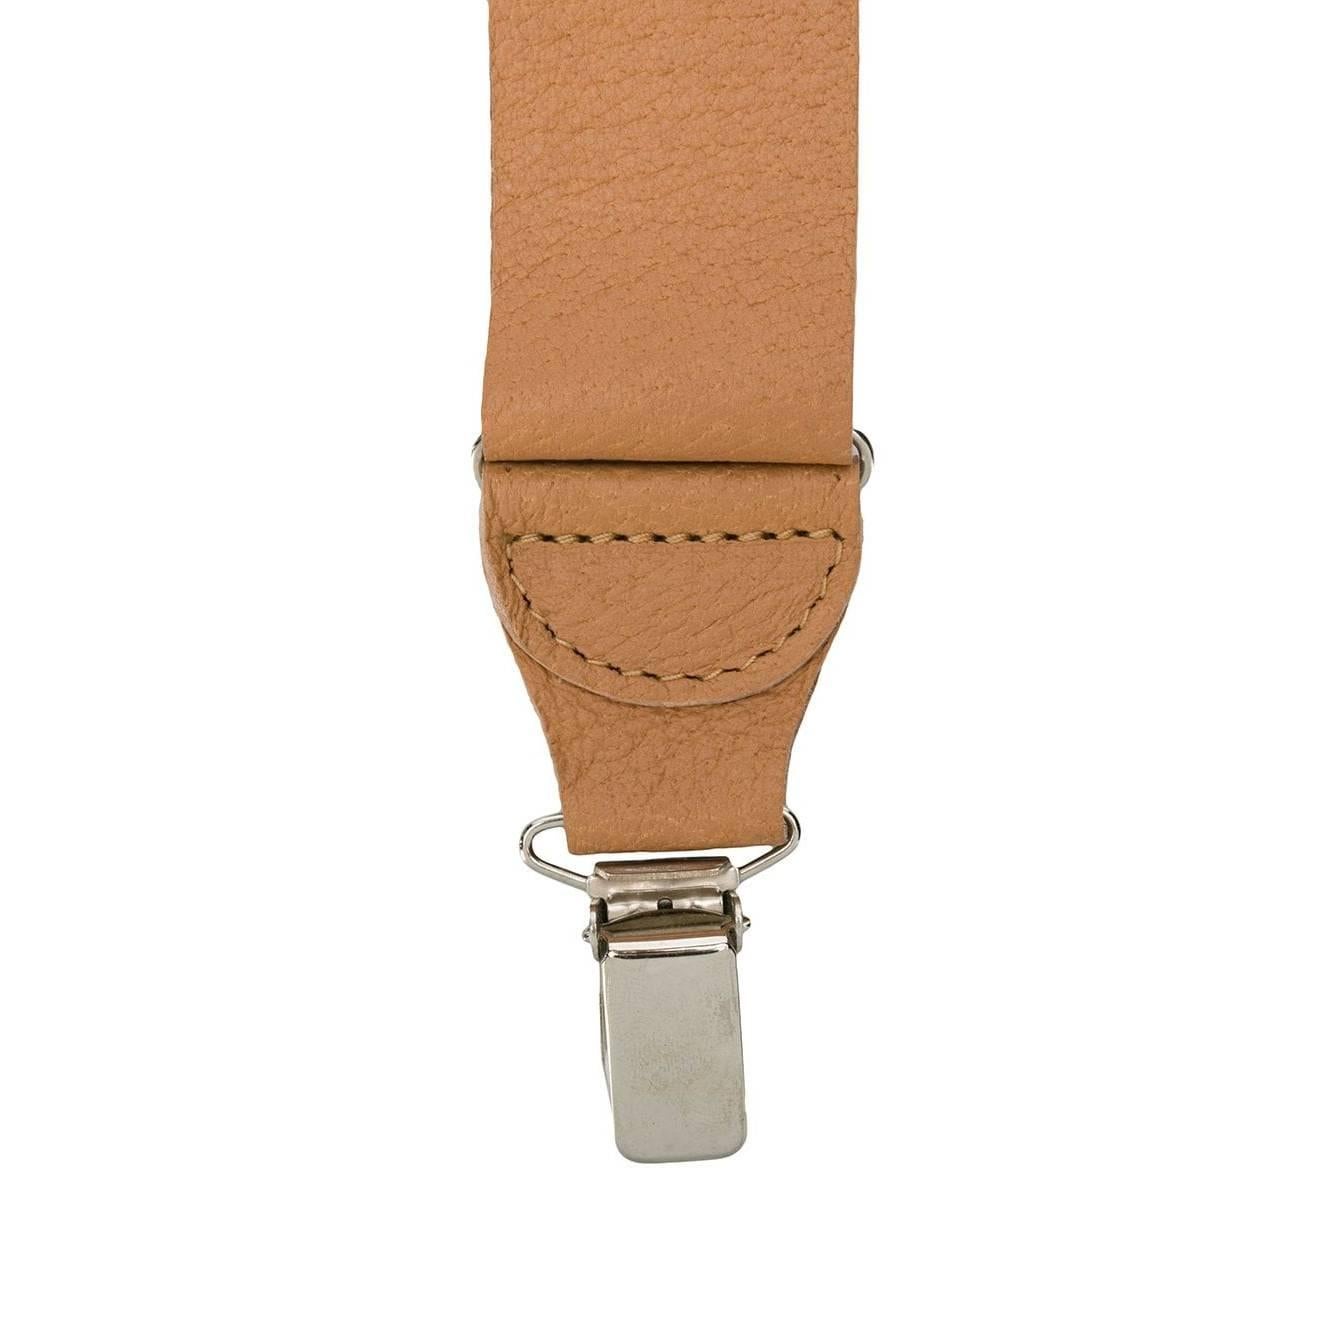 Gianfranco Ferré beige leather braces. Golden metal details.

The product has a slightly oxidized clip as shown in the pictures.

Years: 90s

One Size
